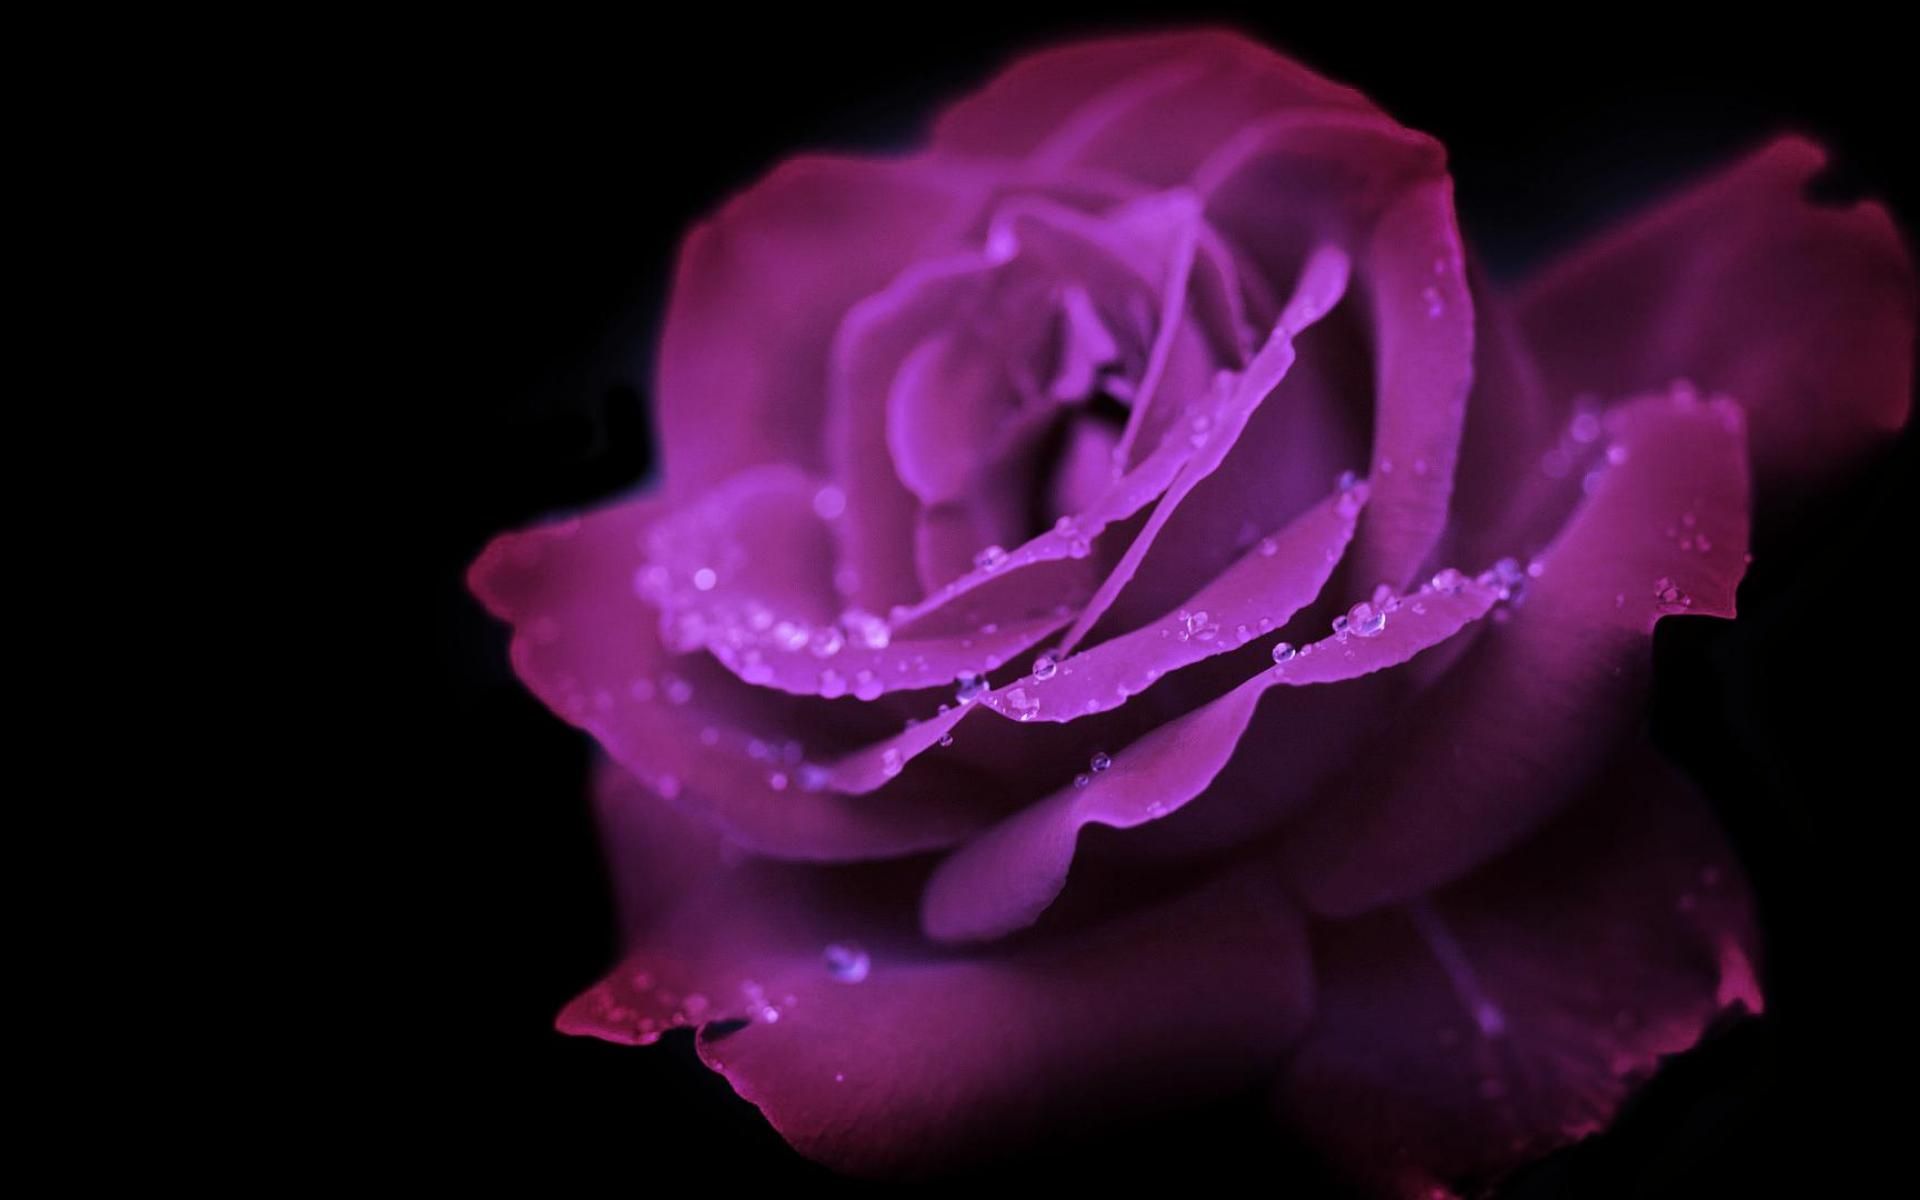 Mauve rose - (#127003) - High Quality and Resolution Wallpapers on ...